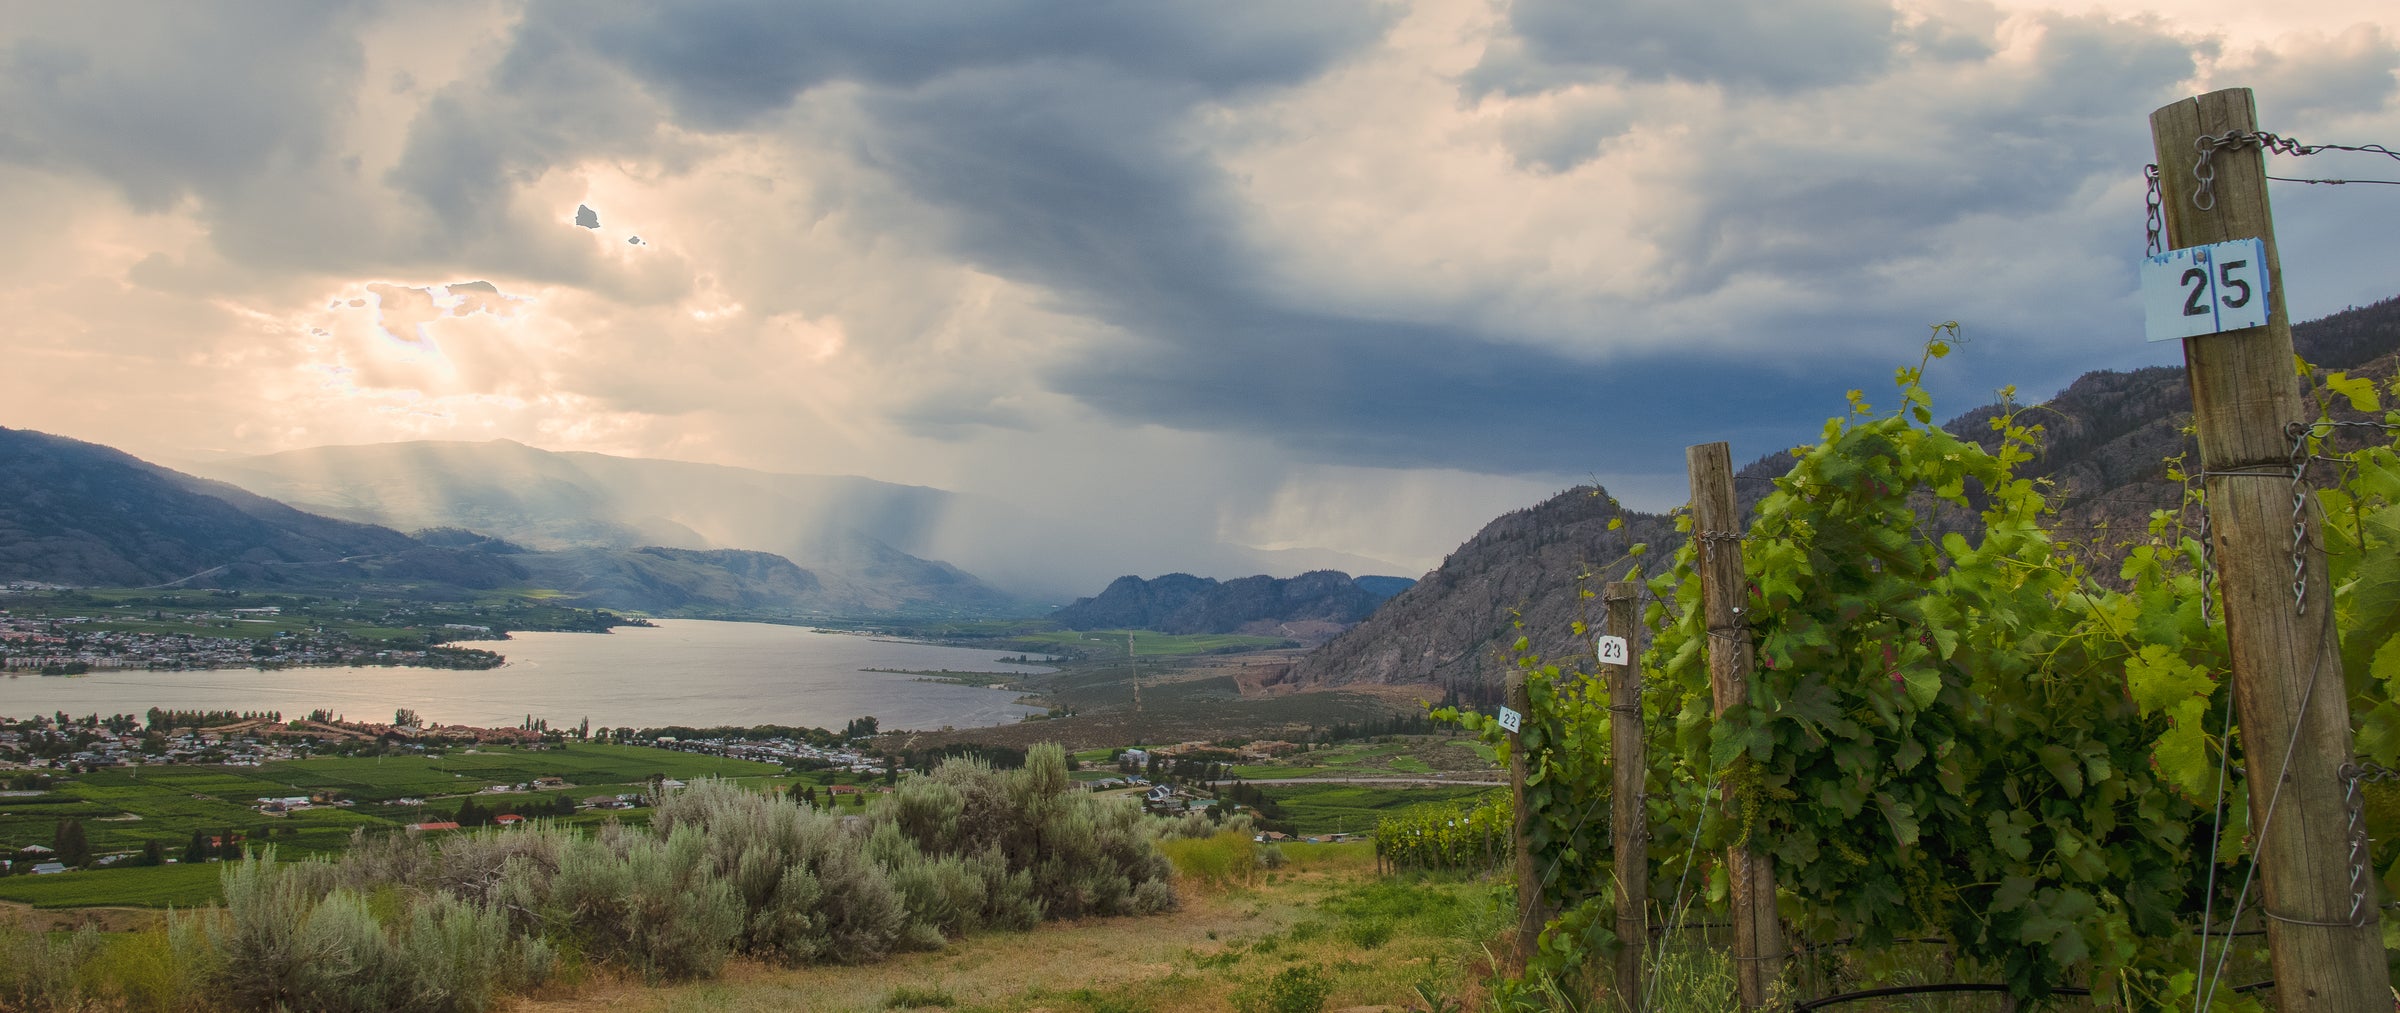 Views of Anarchist Mountain Vineyard in Osoyoos, BC